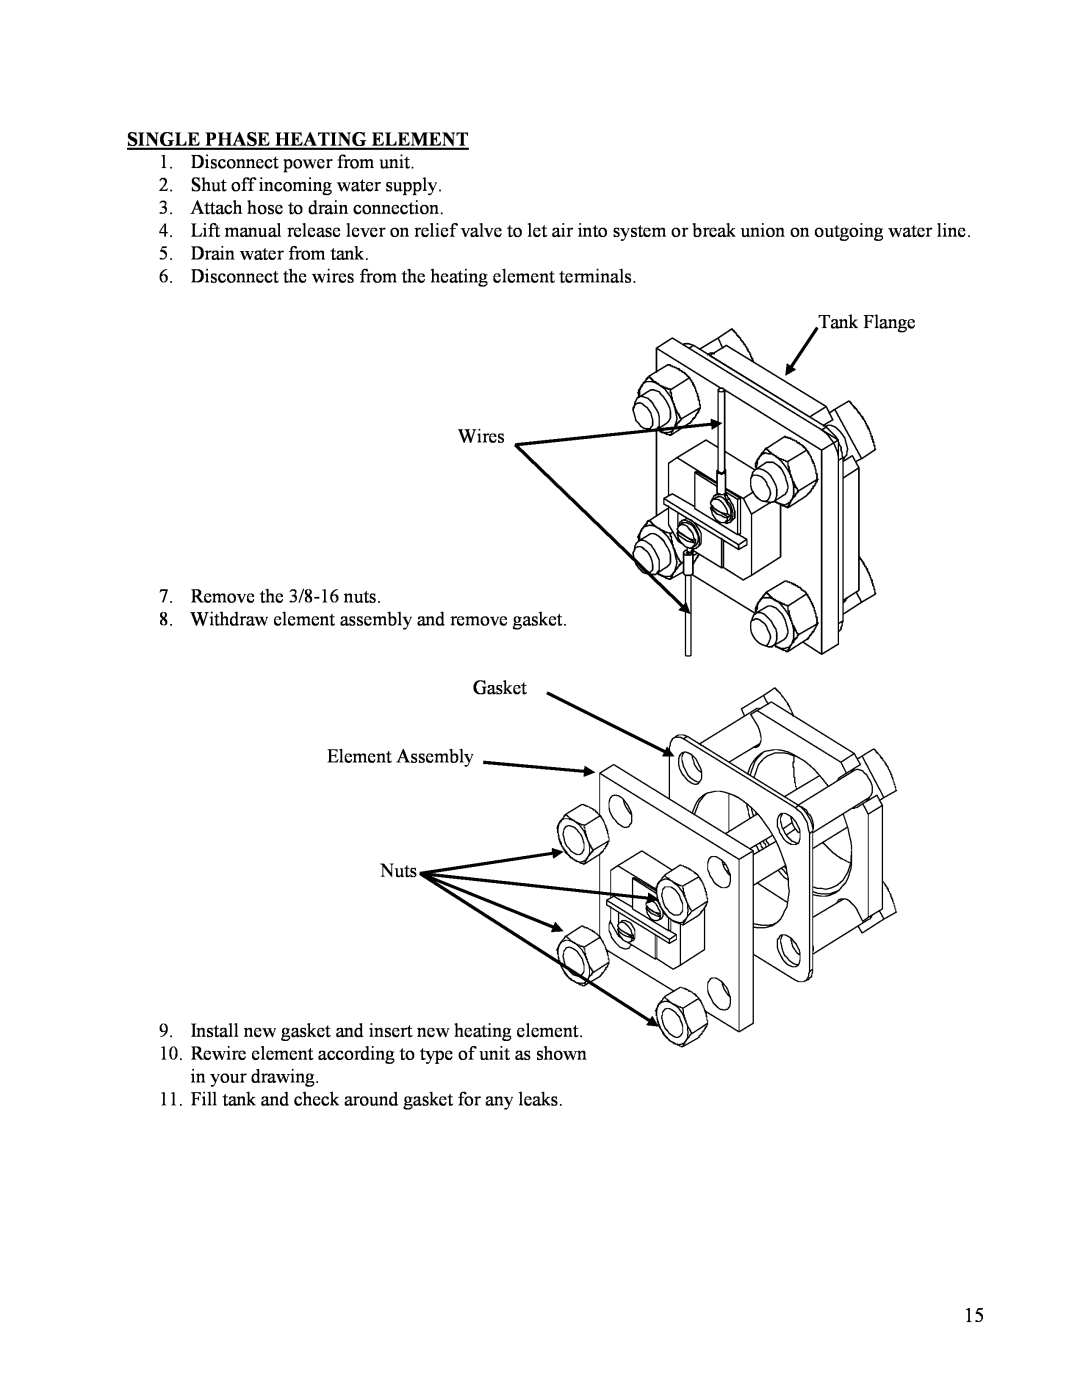 Hubbell Electric Heater Company EMV manual Single Phase Heating Element 